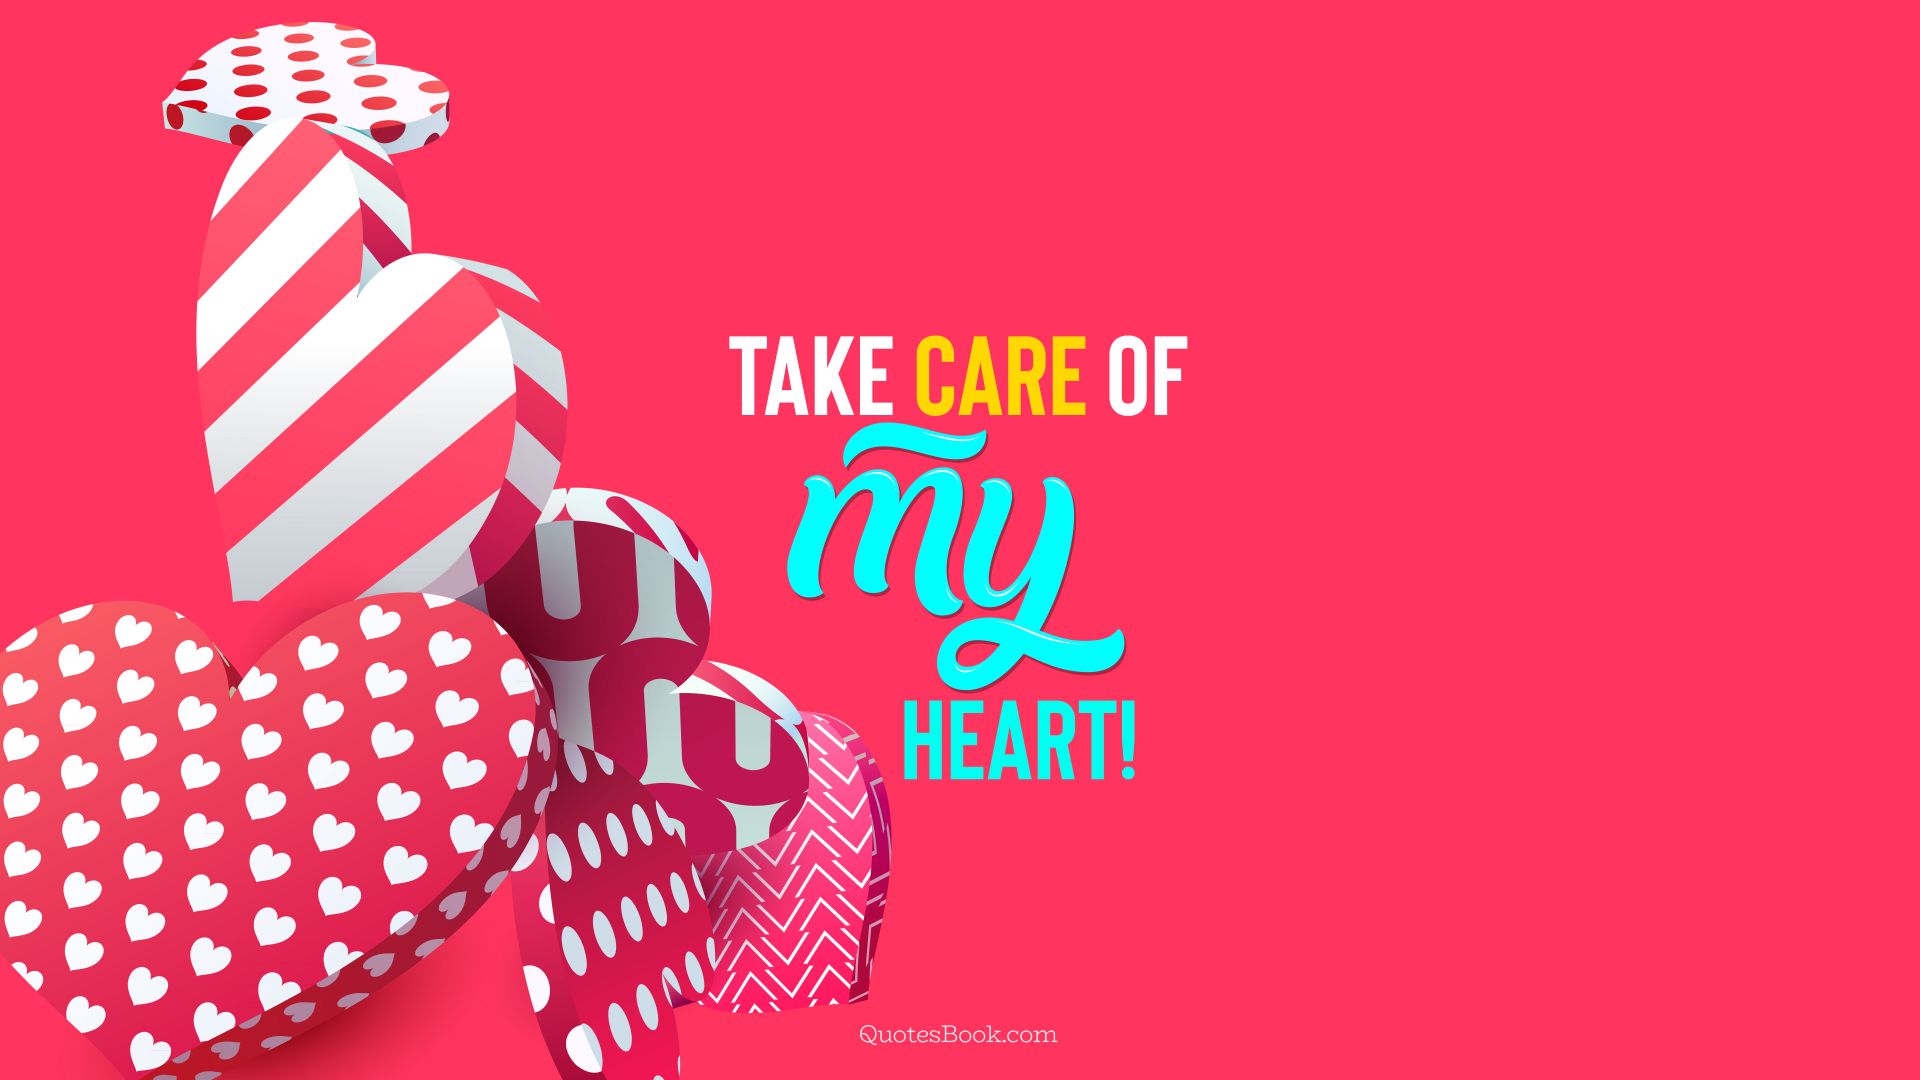 Take care of my heart!. - Quote by QuotesBook